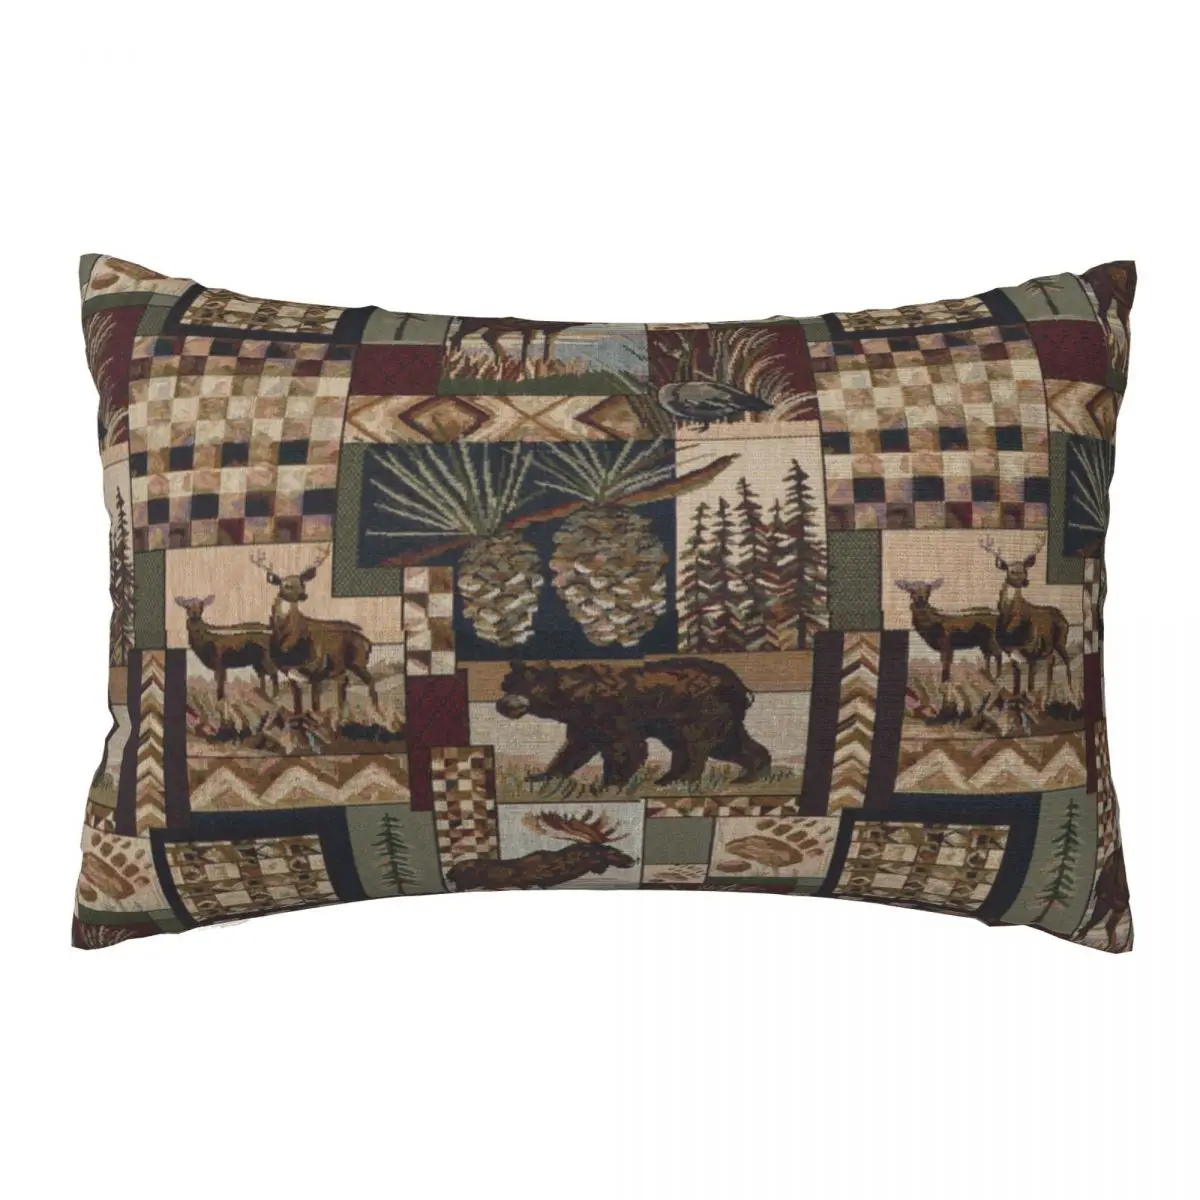 

Moose Bear Deer In Woods Decorative Pillow Covers Throw Pillow Cover Home Pillows Shells Cushion Cover Zippered Pillowcase